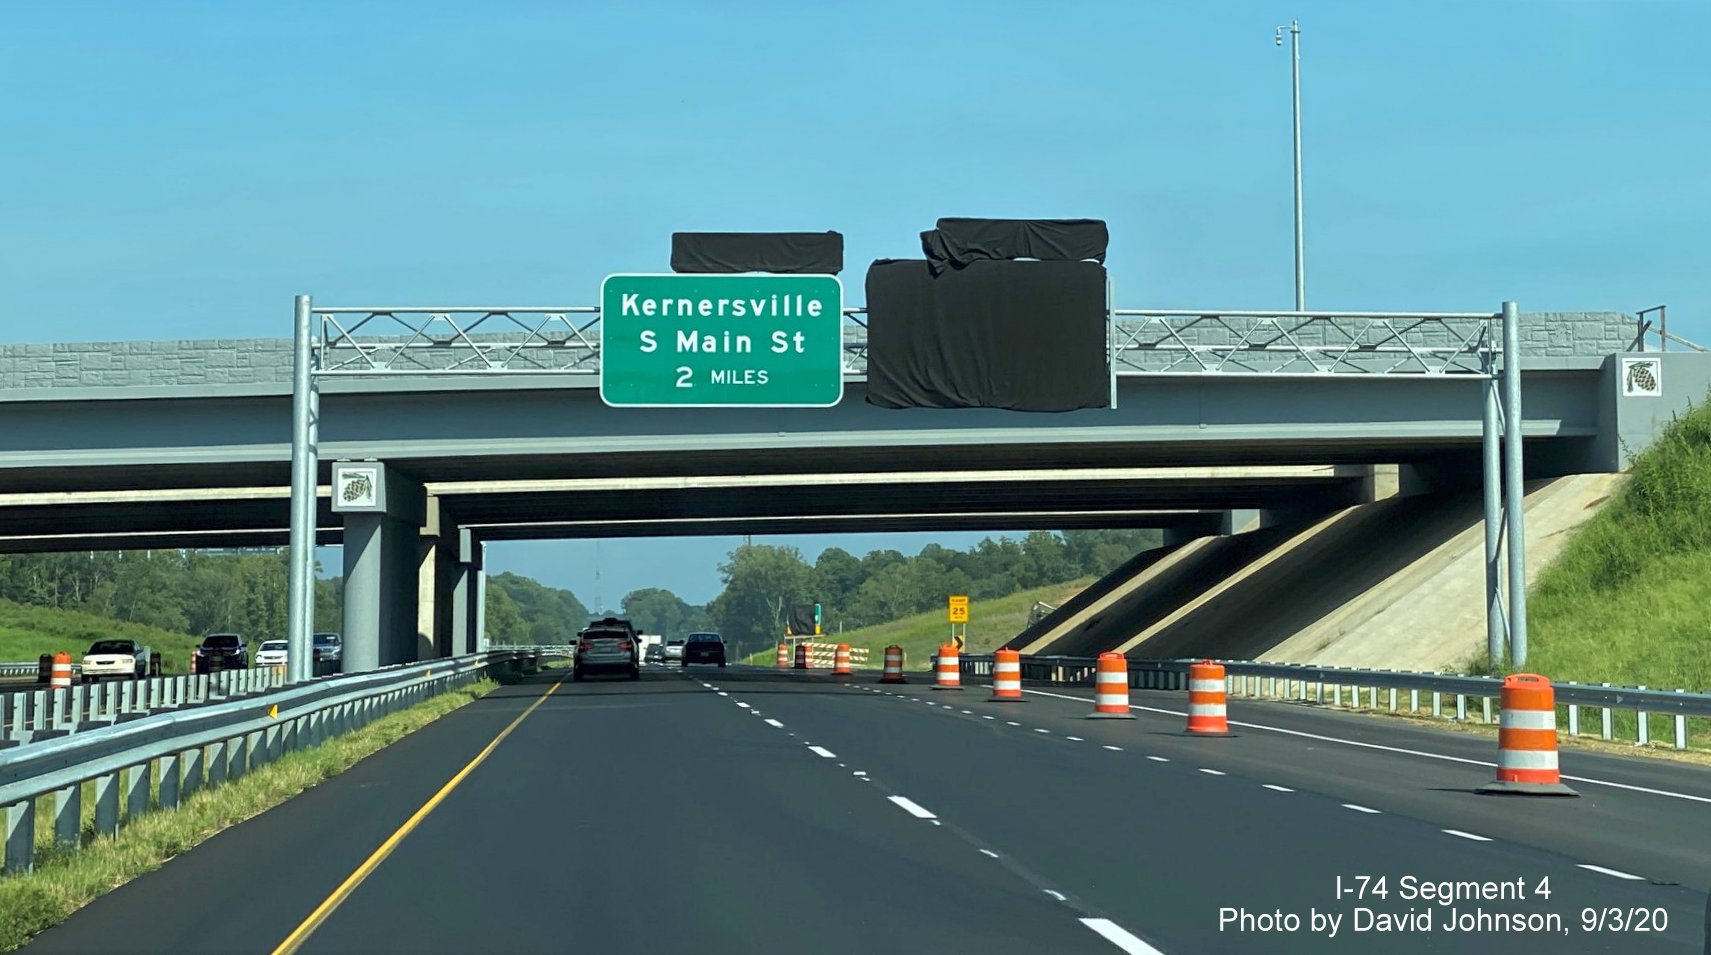 Image of overhead signage covered over prior to opening of ramp to US 421 South Salem Parkway to NC 74 East Winston Salem Northern Beltway, by David Johnson September 2020